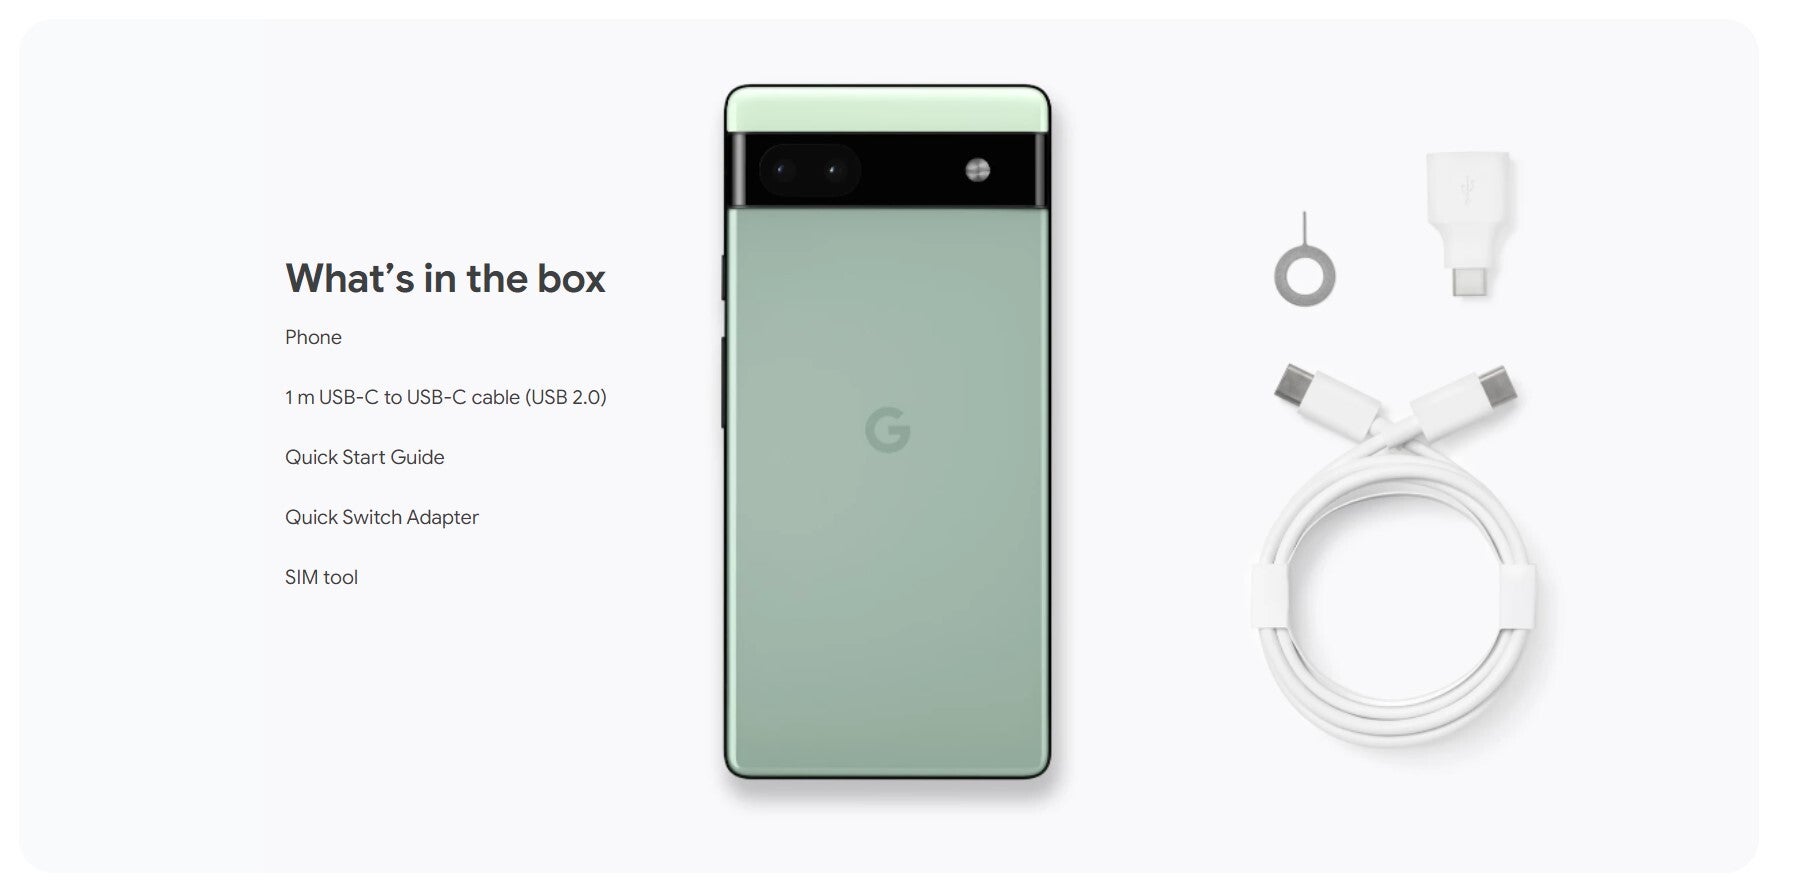 Pixel 6a box contents - The Google Pixel 6a lands with camera might, Tensor, and unbeatable price